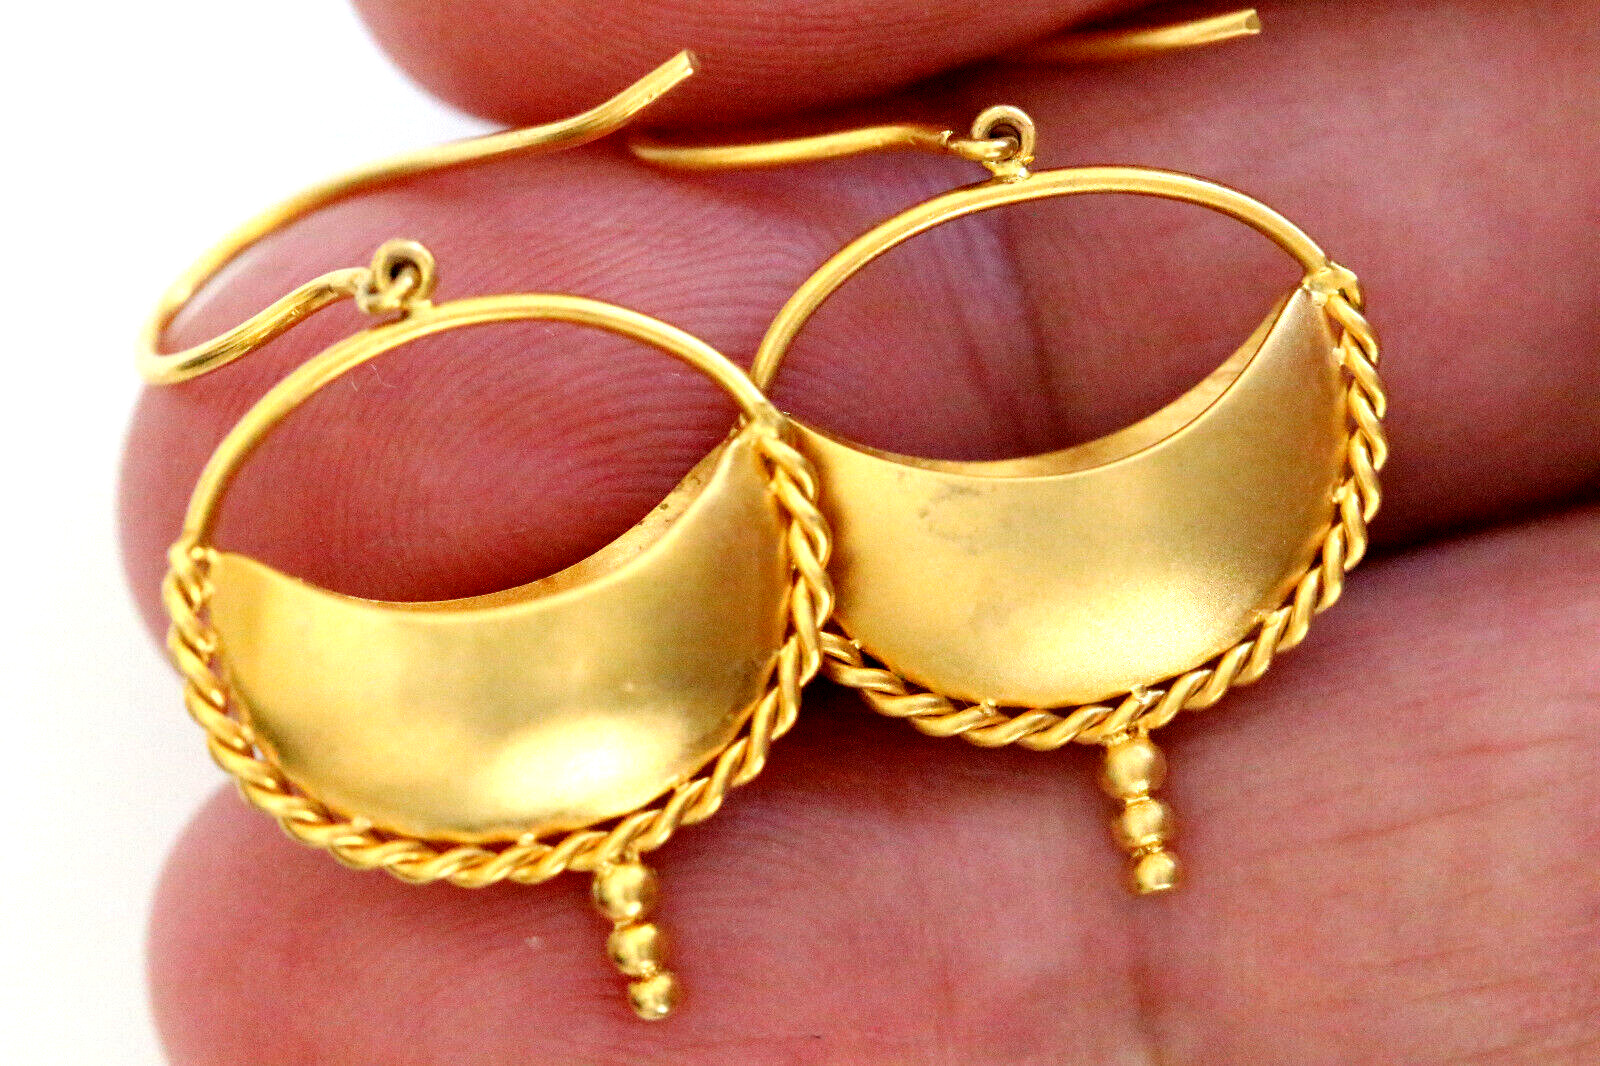 Real Gold Earrings, Hand Crafted Rare Gold Earrings